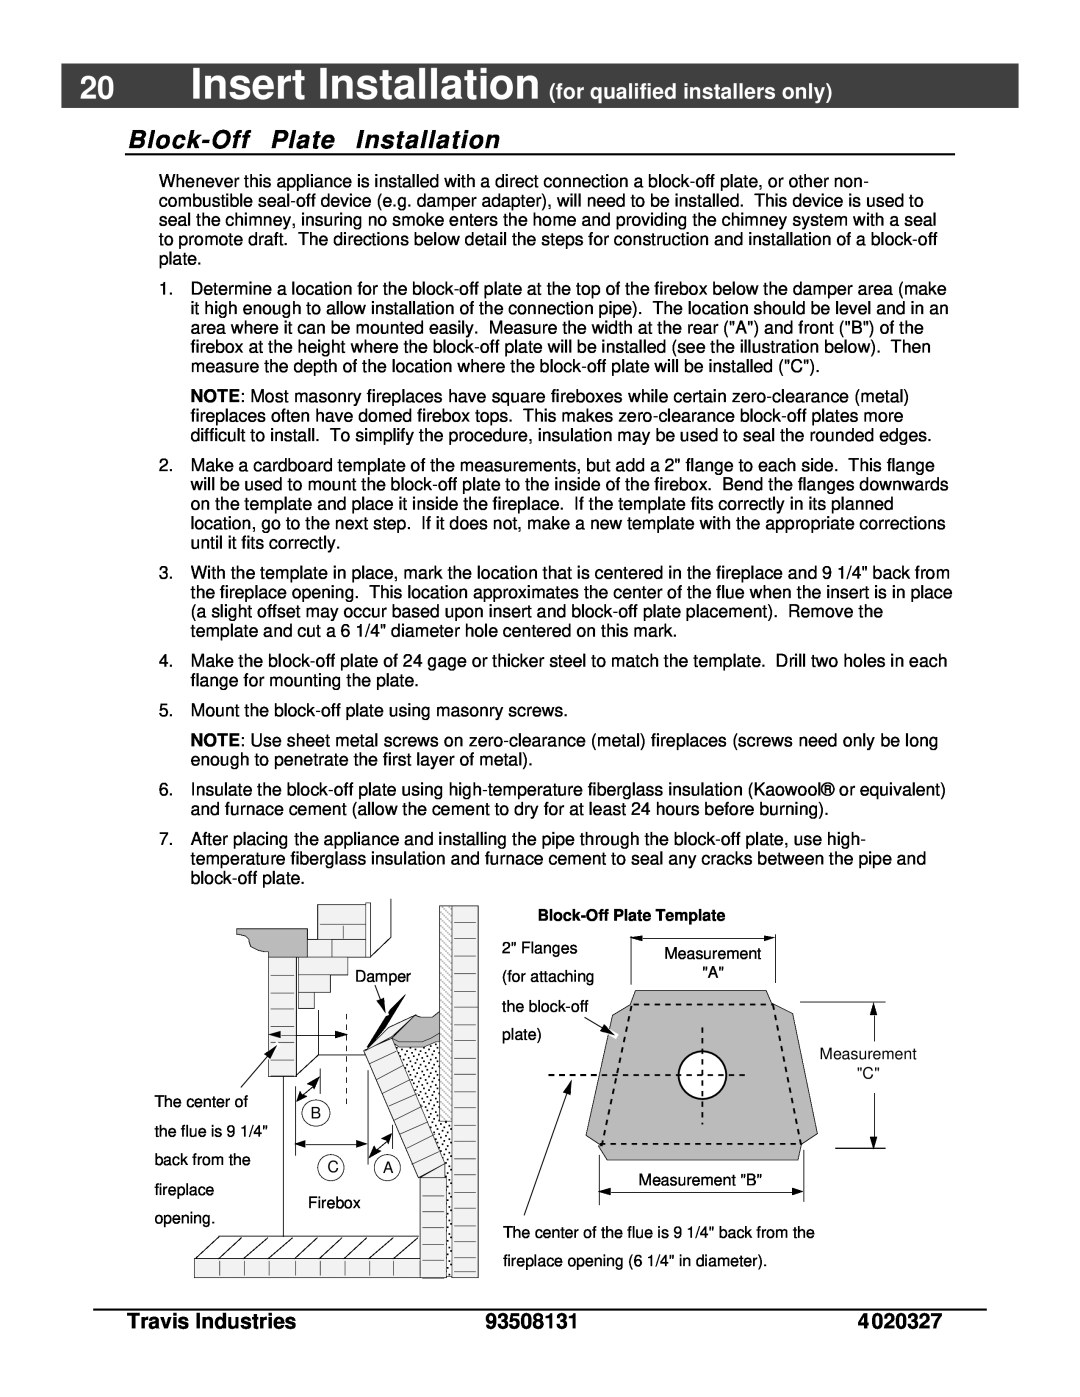 Lopi Answer Wood Stove owner manual Block-OffPlate Installation 